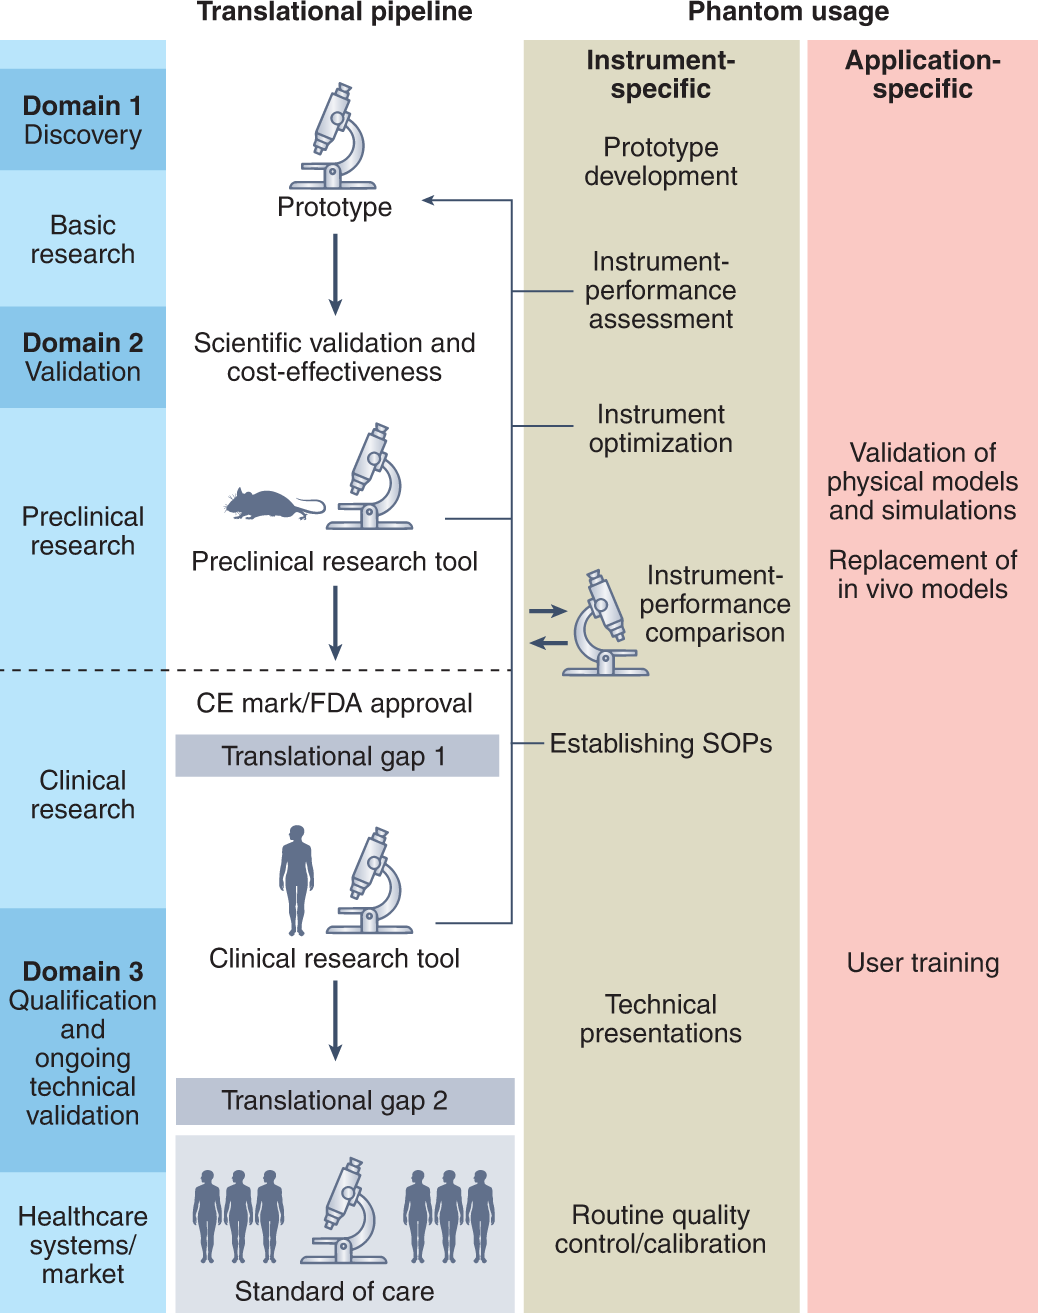 Criteria for the design of tissue-mimicking phantoms for the